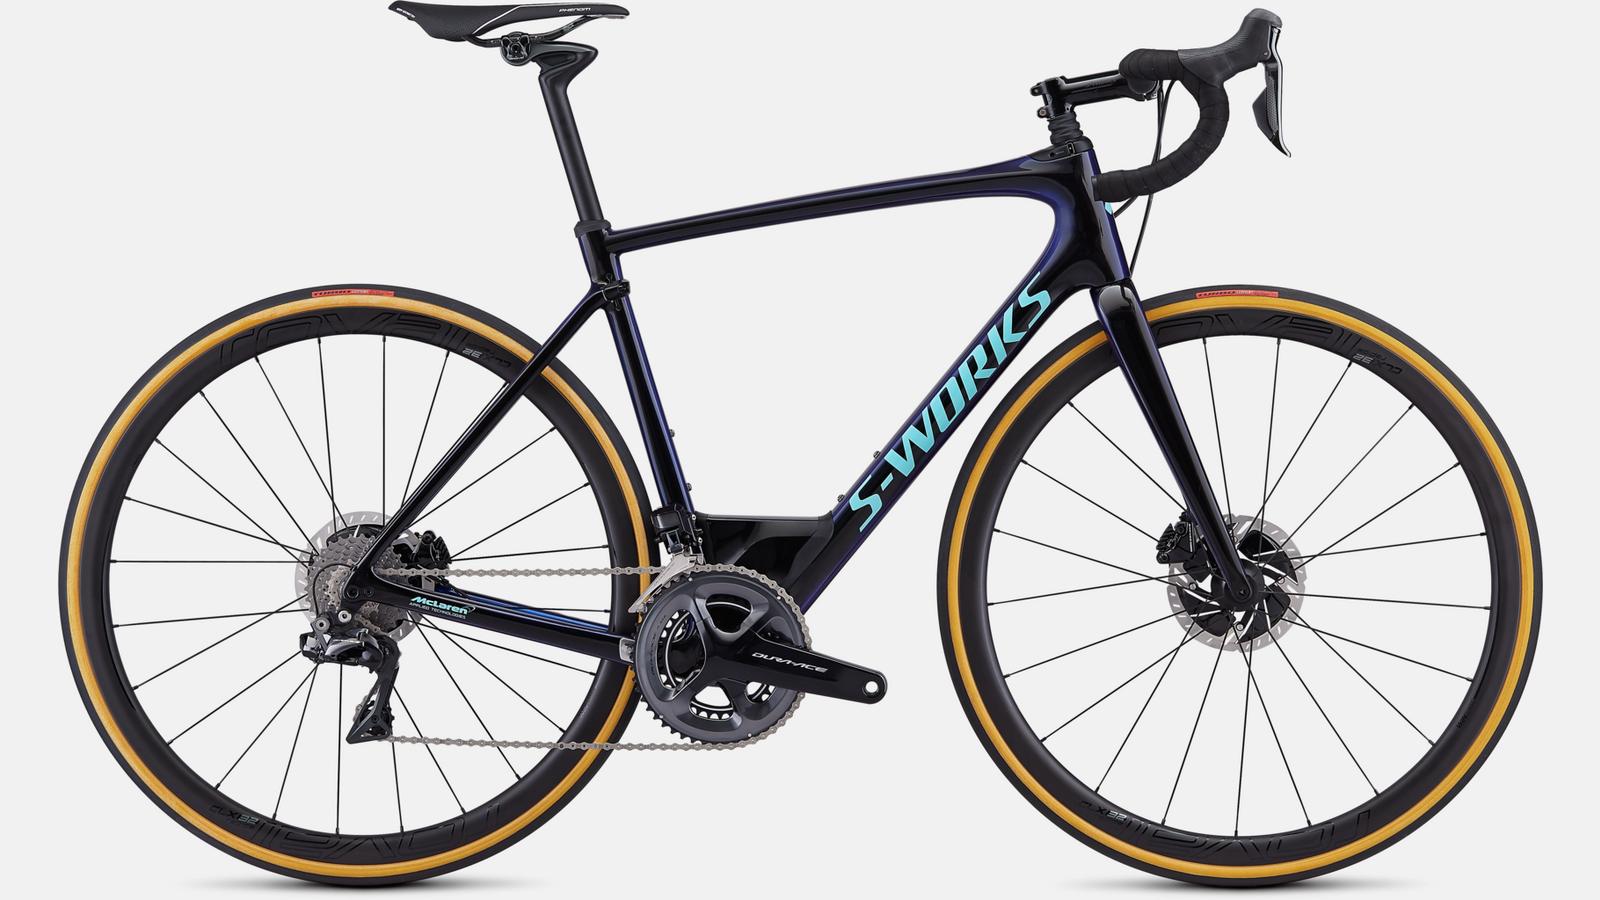 Paint for 2019 Specialized S-Works Roubaix - Gloss Tarmac Black